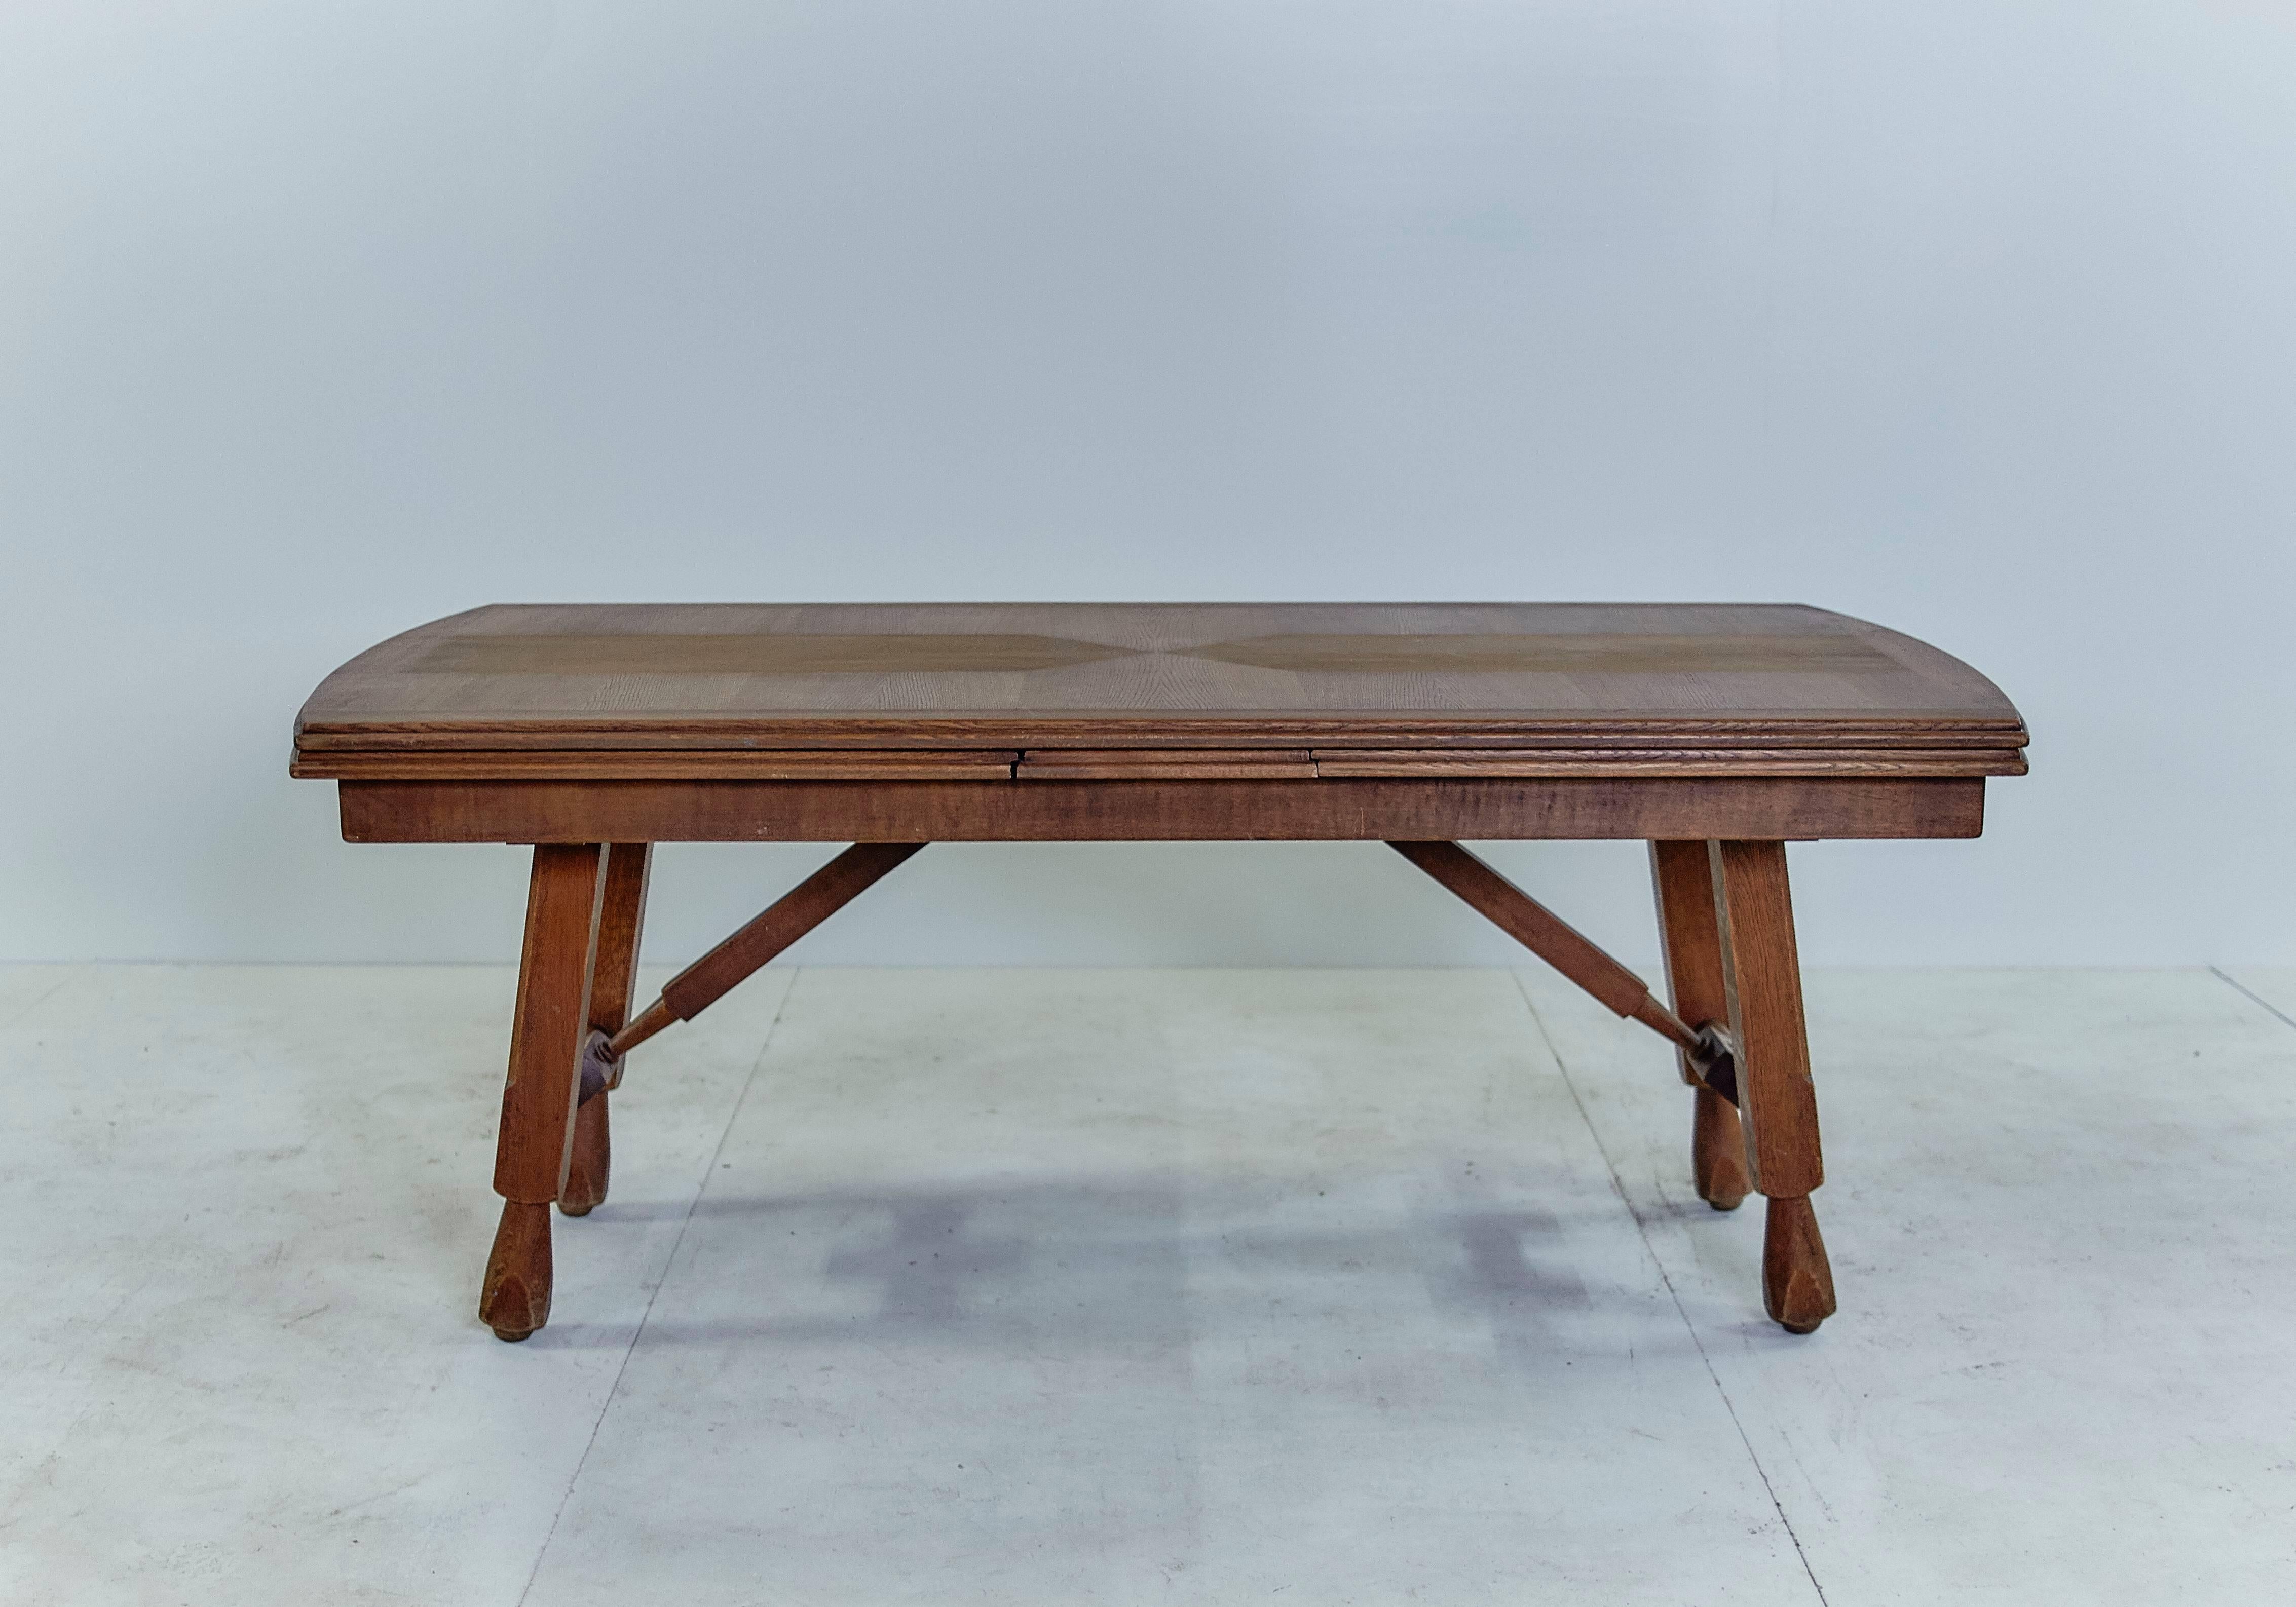 Extending oak dining table by Guillerme et Chambron, France
Model Petronille, 1966
Dimensions closed: 188 cm long by 96 cm wide by 75 cm high
Dimensions open: 328 cm long by 96 cm wide by 75 cm high

Very nice work of marquetry on the table